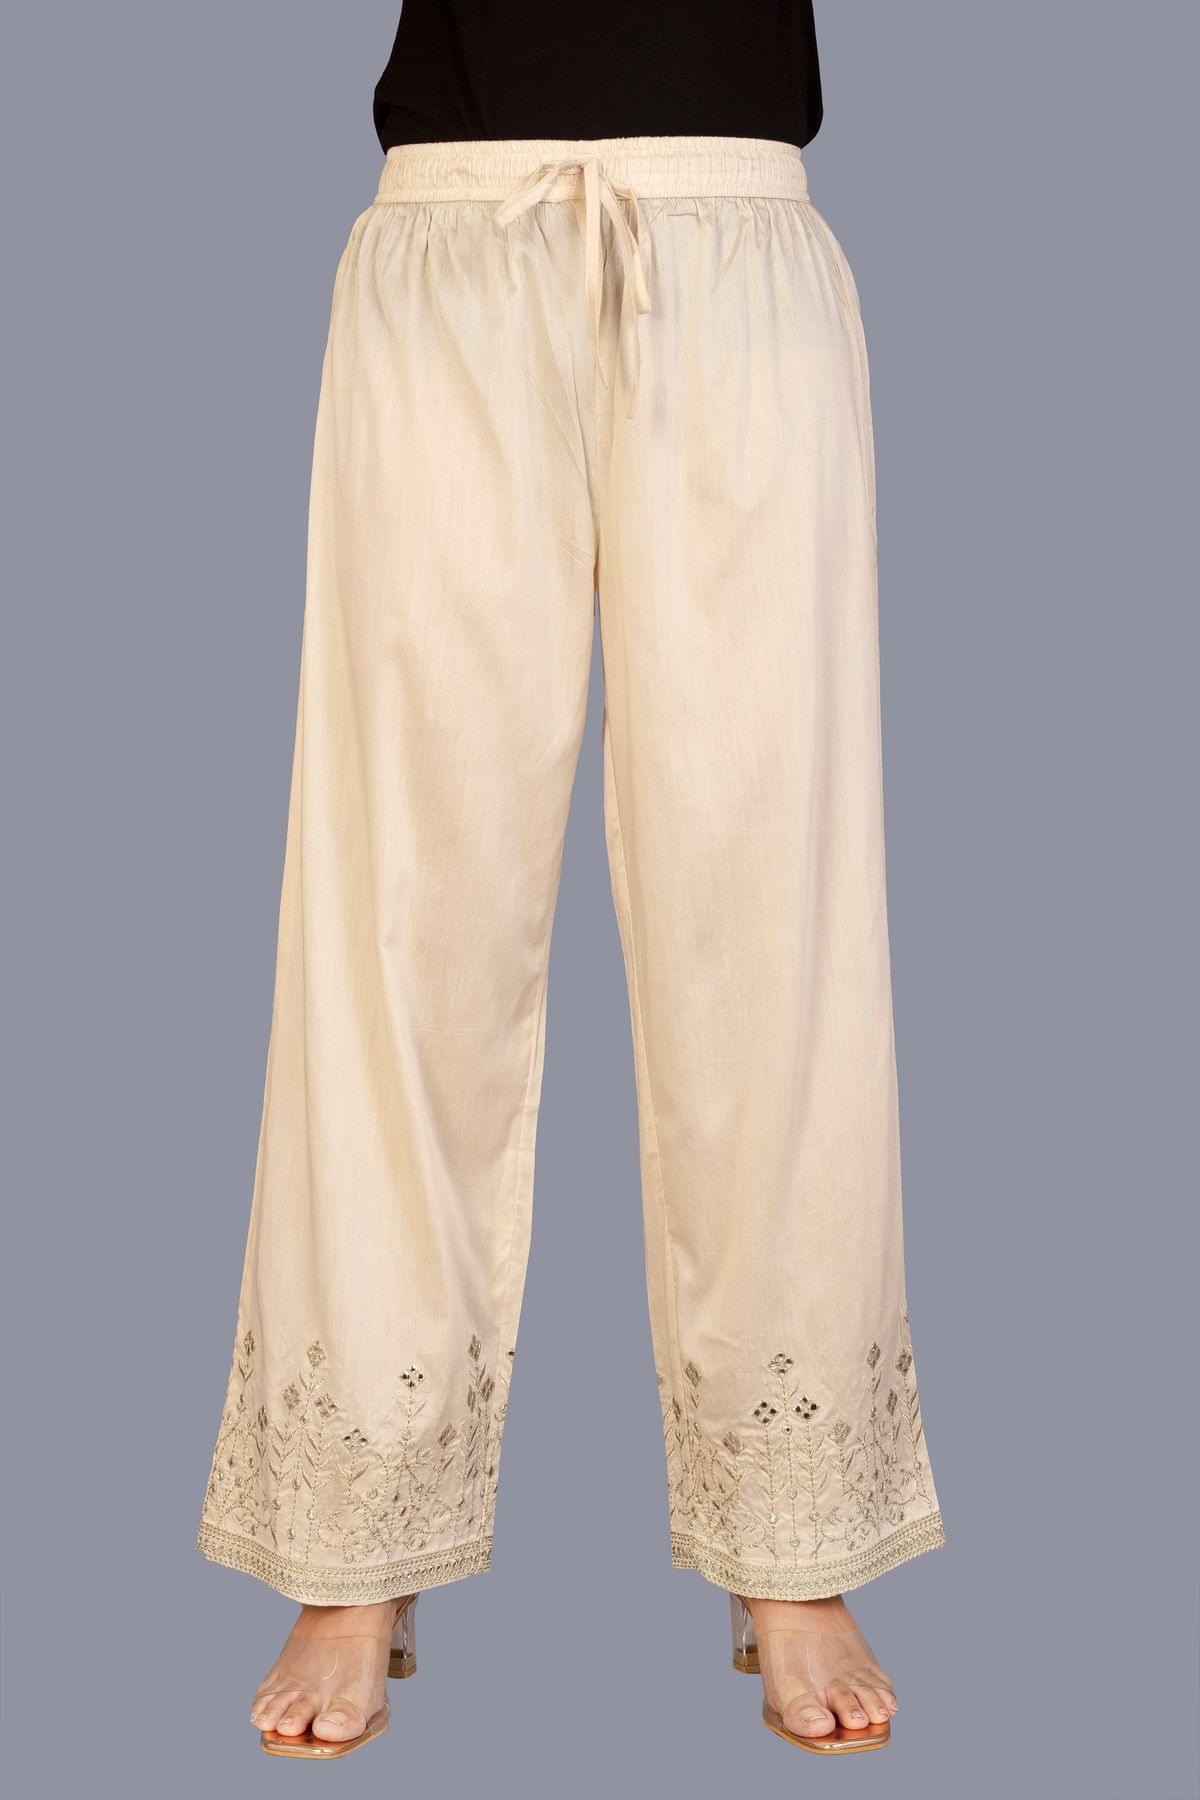 Buy Online Off White Cotton Palazzo for Women  Girls at Best Prices in  Biba IndiaCORE14920SS19OWH